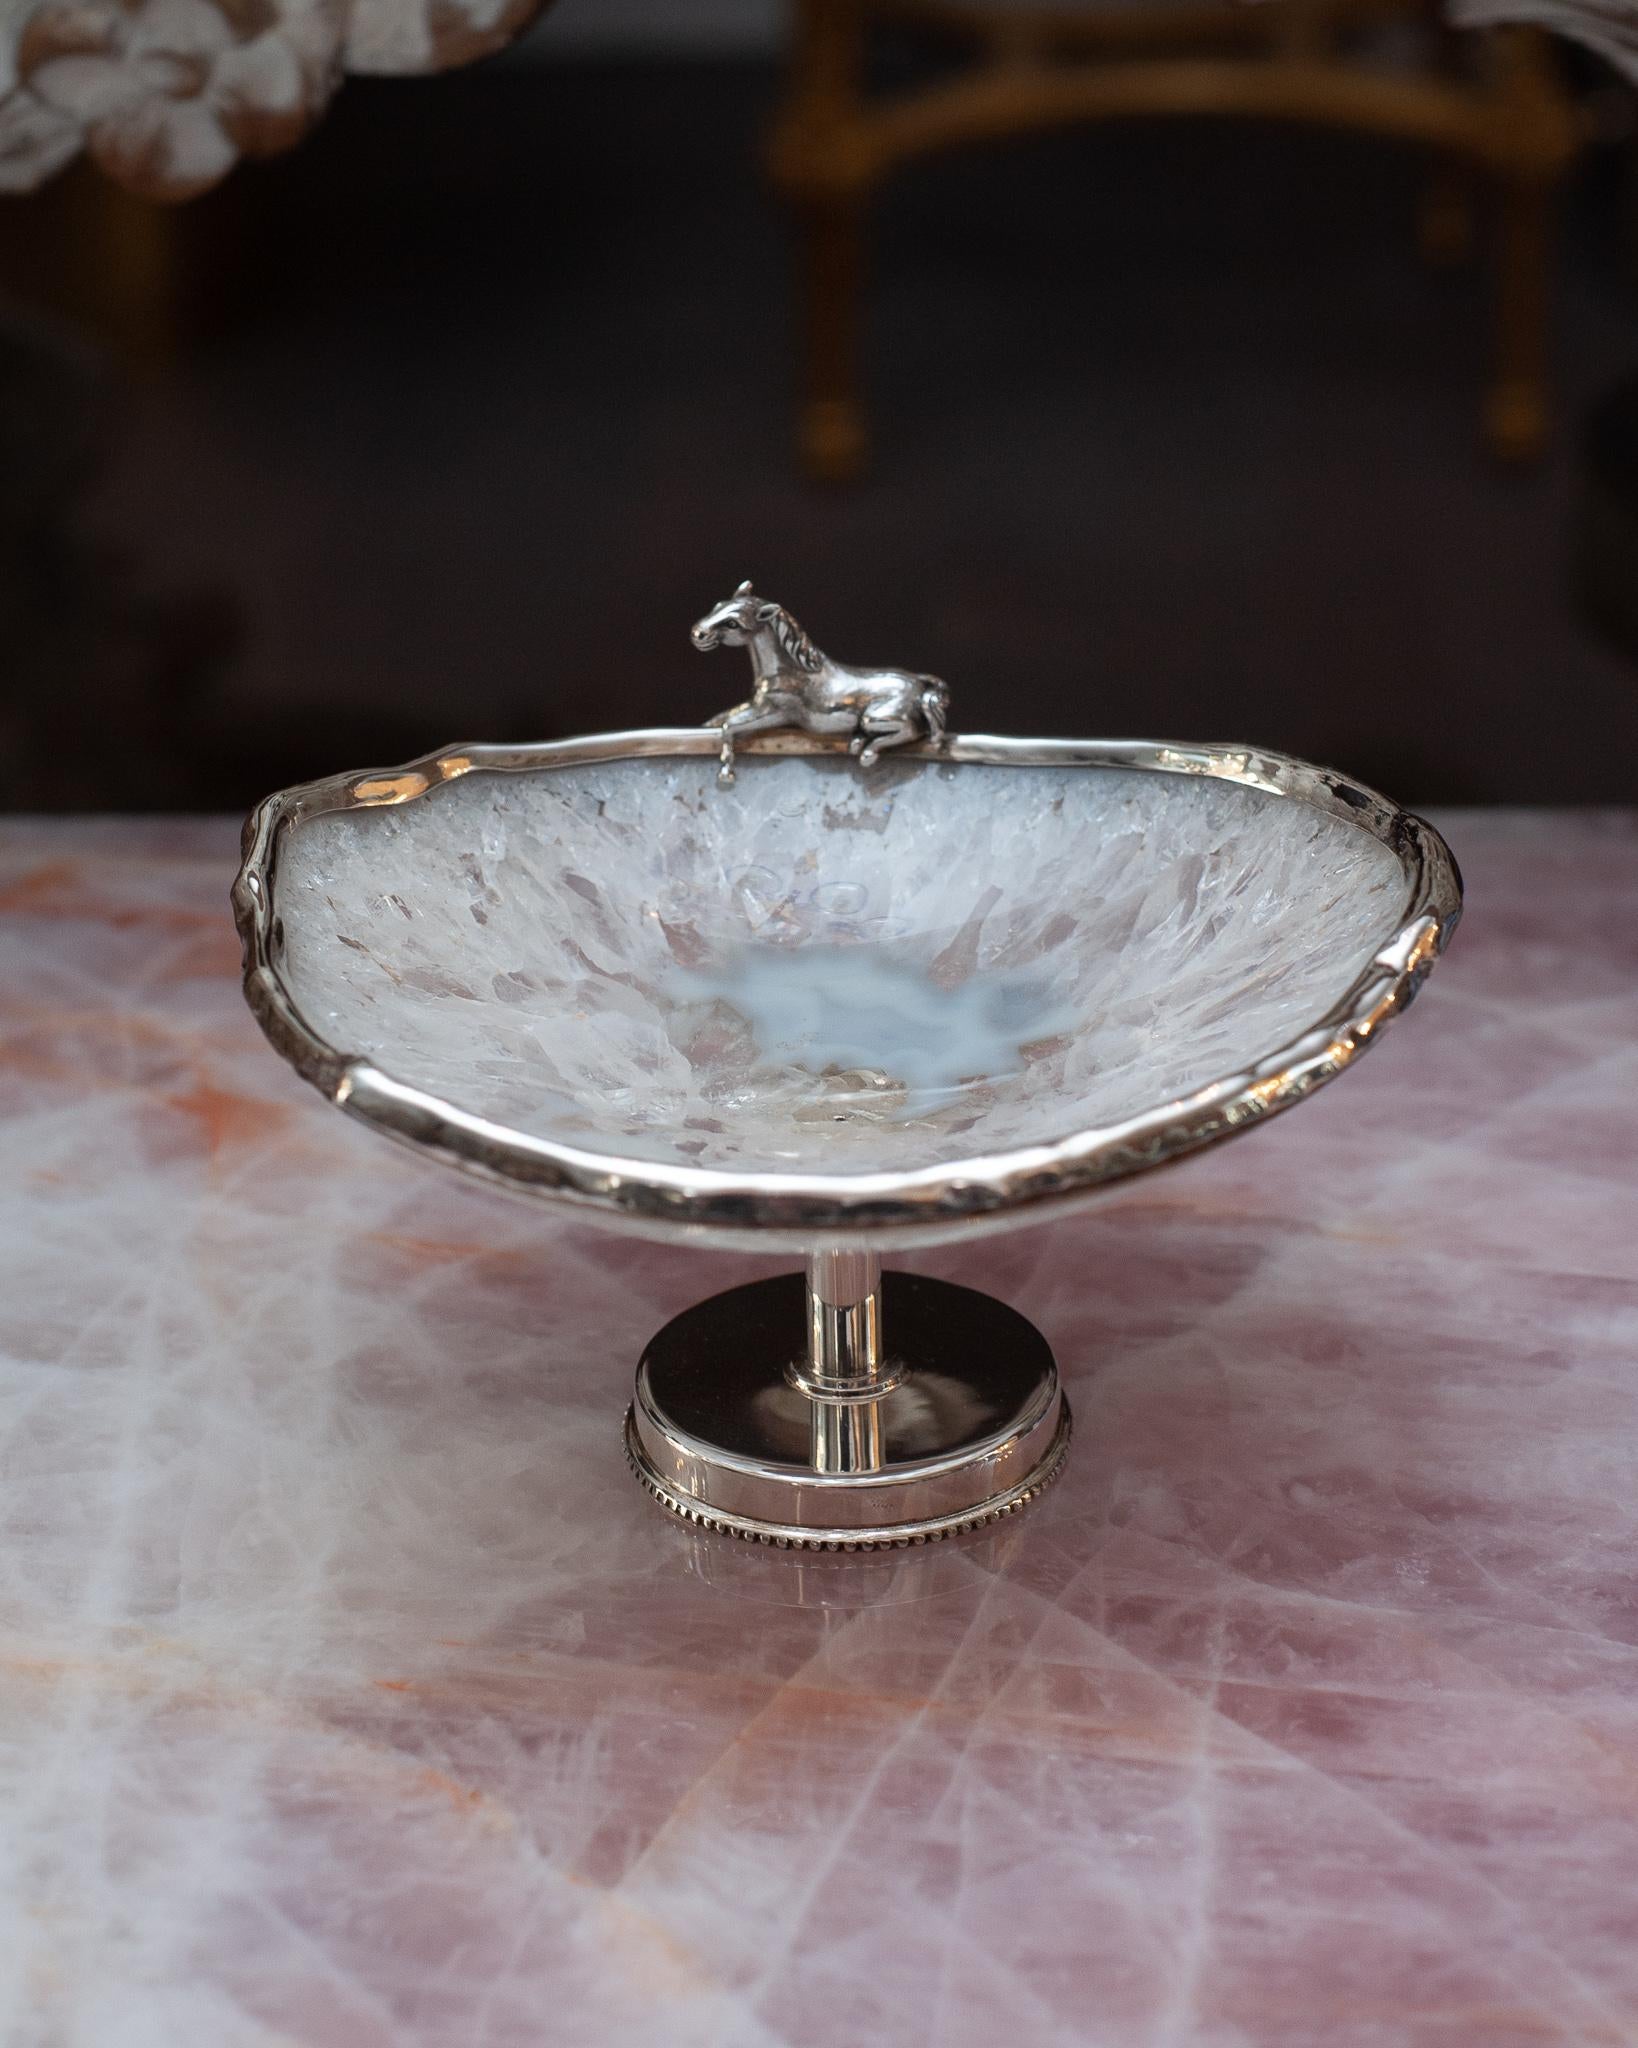 A gorgeous rock crystal and agate footed bowl with sterling silver rim and base, featuring a horse perched on its edge. Expertly crafted in Portugal by a master jeweller.